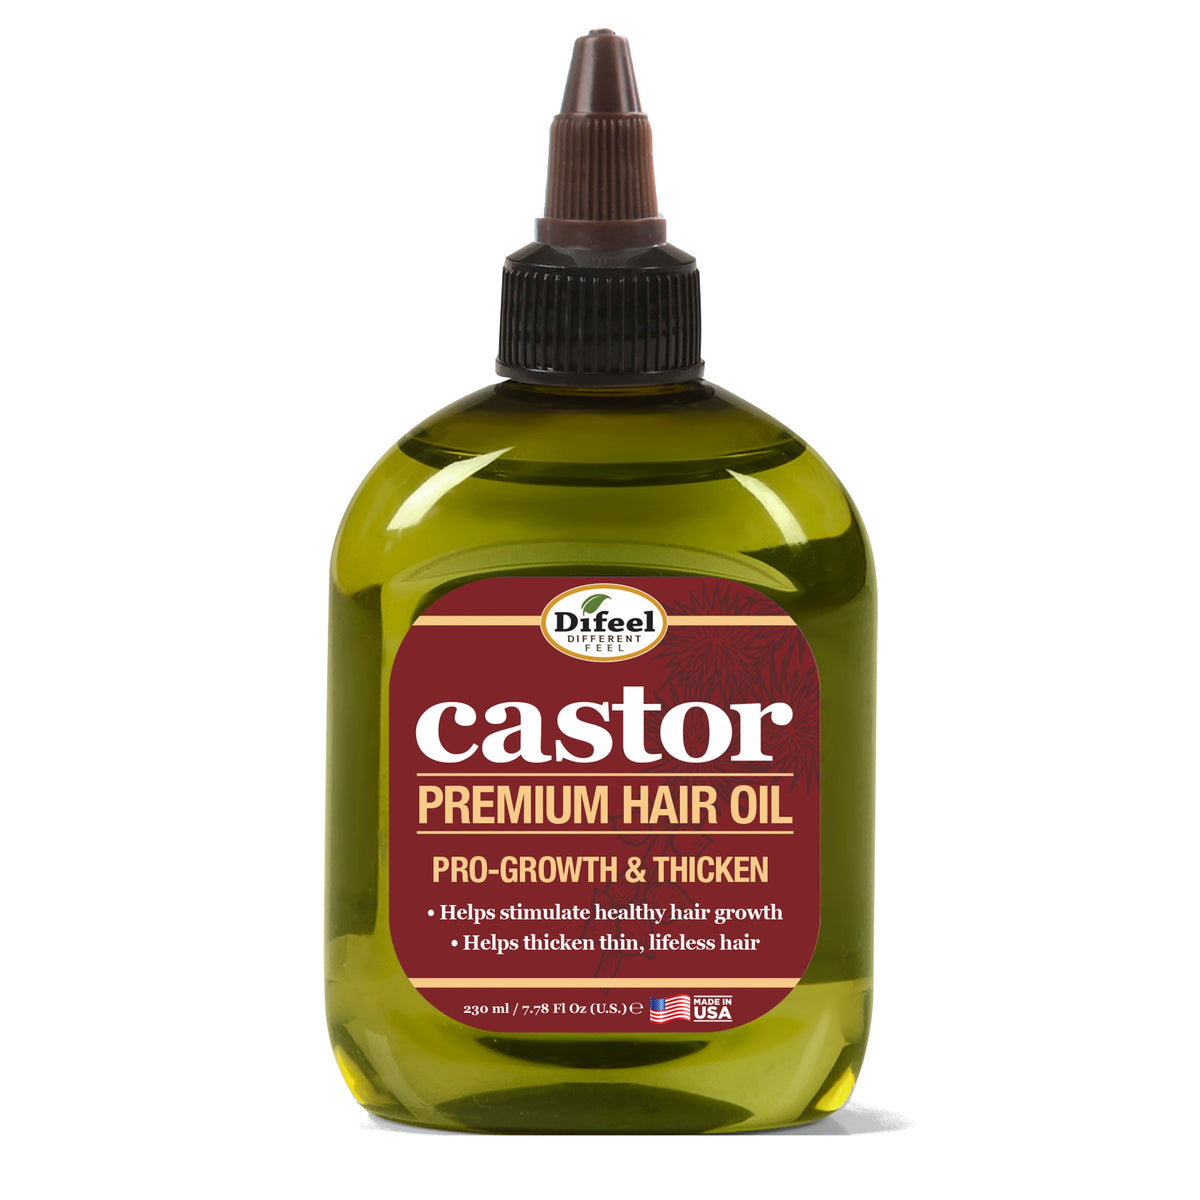 Difeel Castor Pro-Growth Hair Oil 7.1 oz. by difeel - find your natural beauty